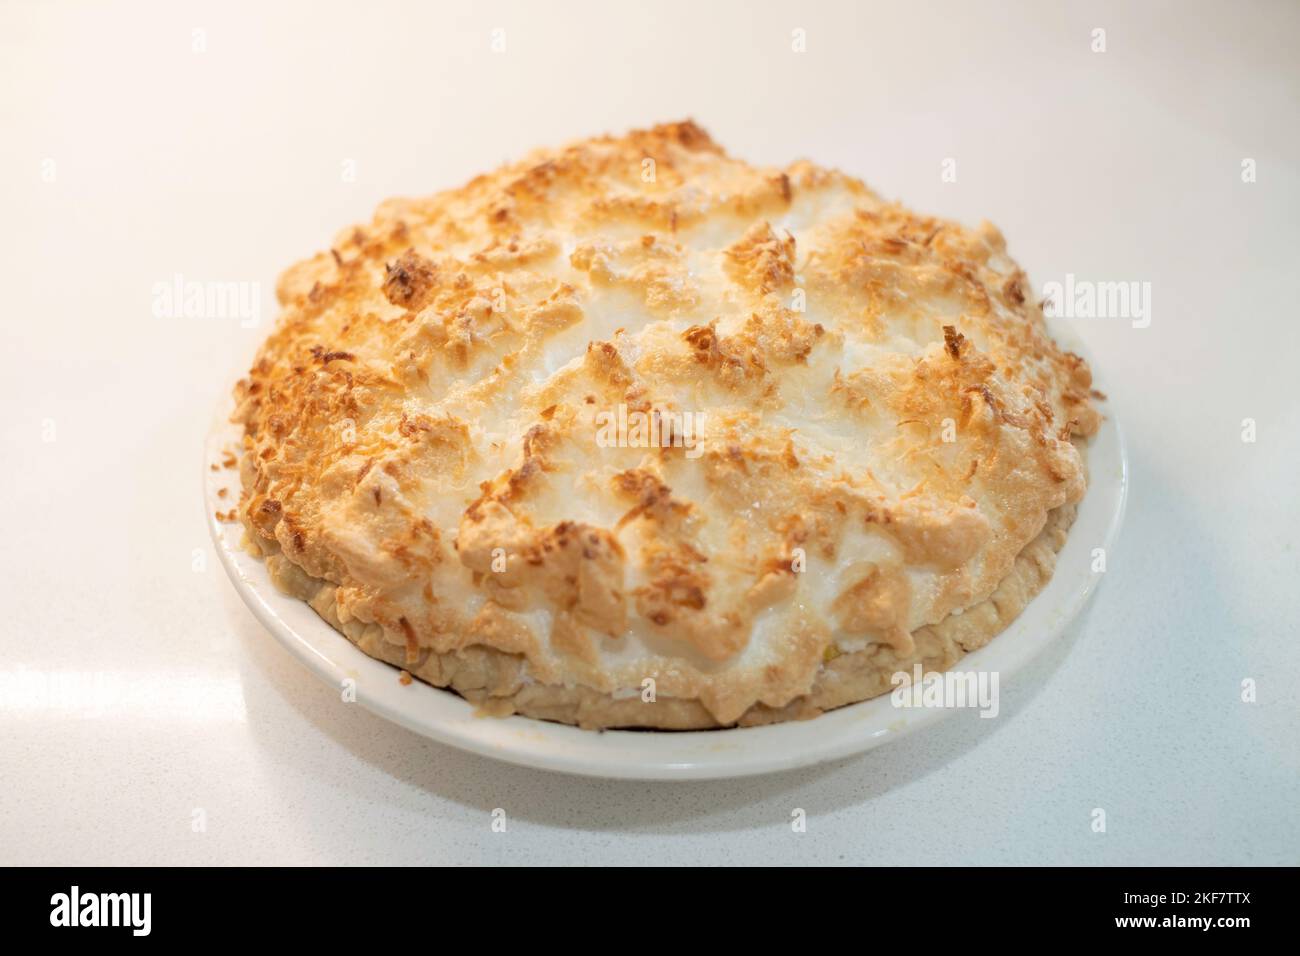 A whole homemade coconut cream pie cooling on a countertop. USA Stock Photo